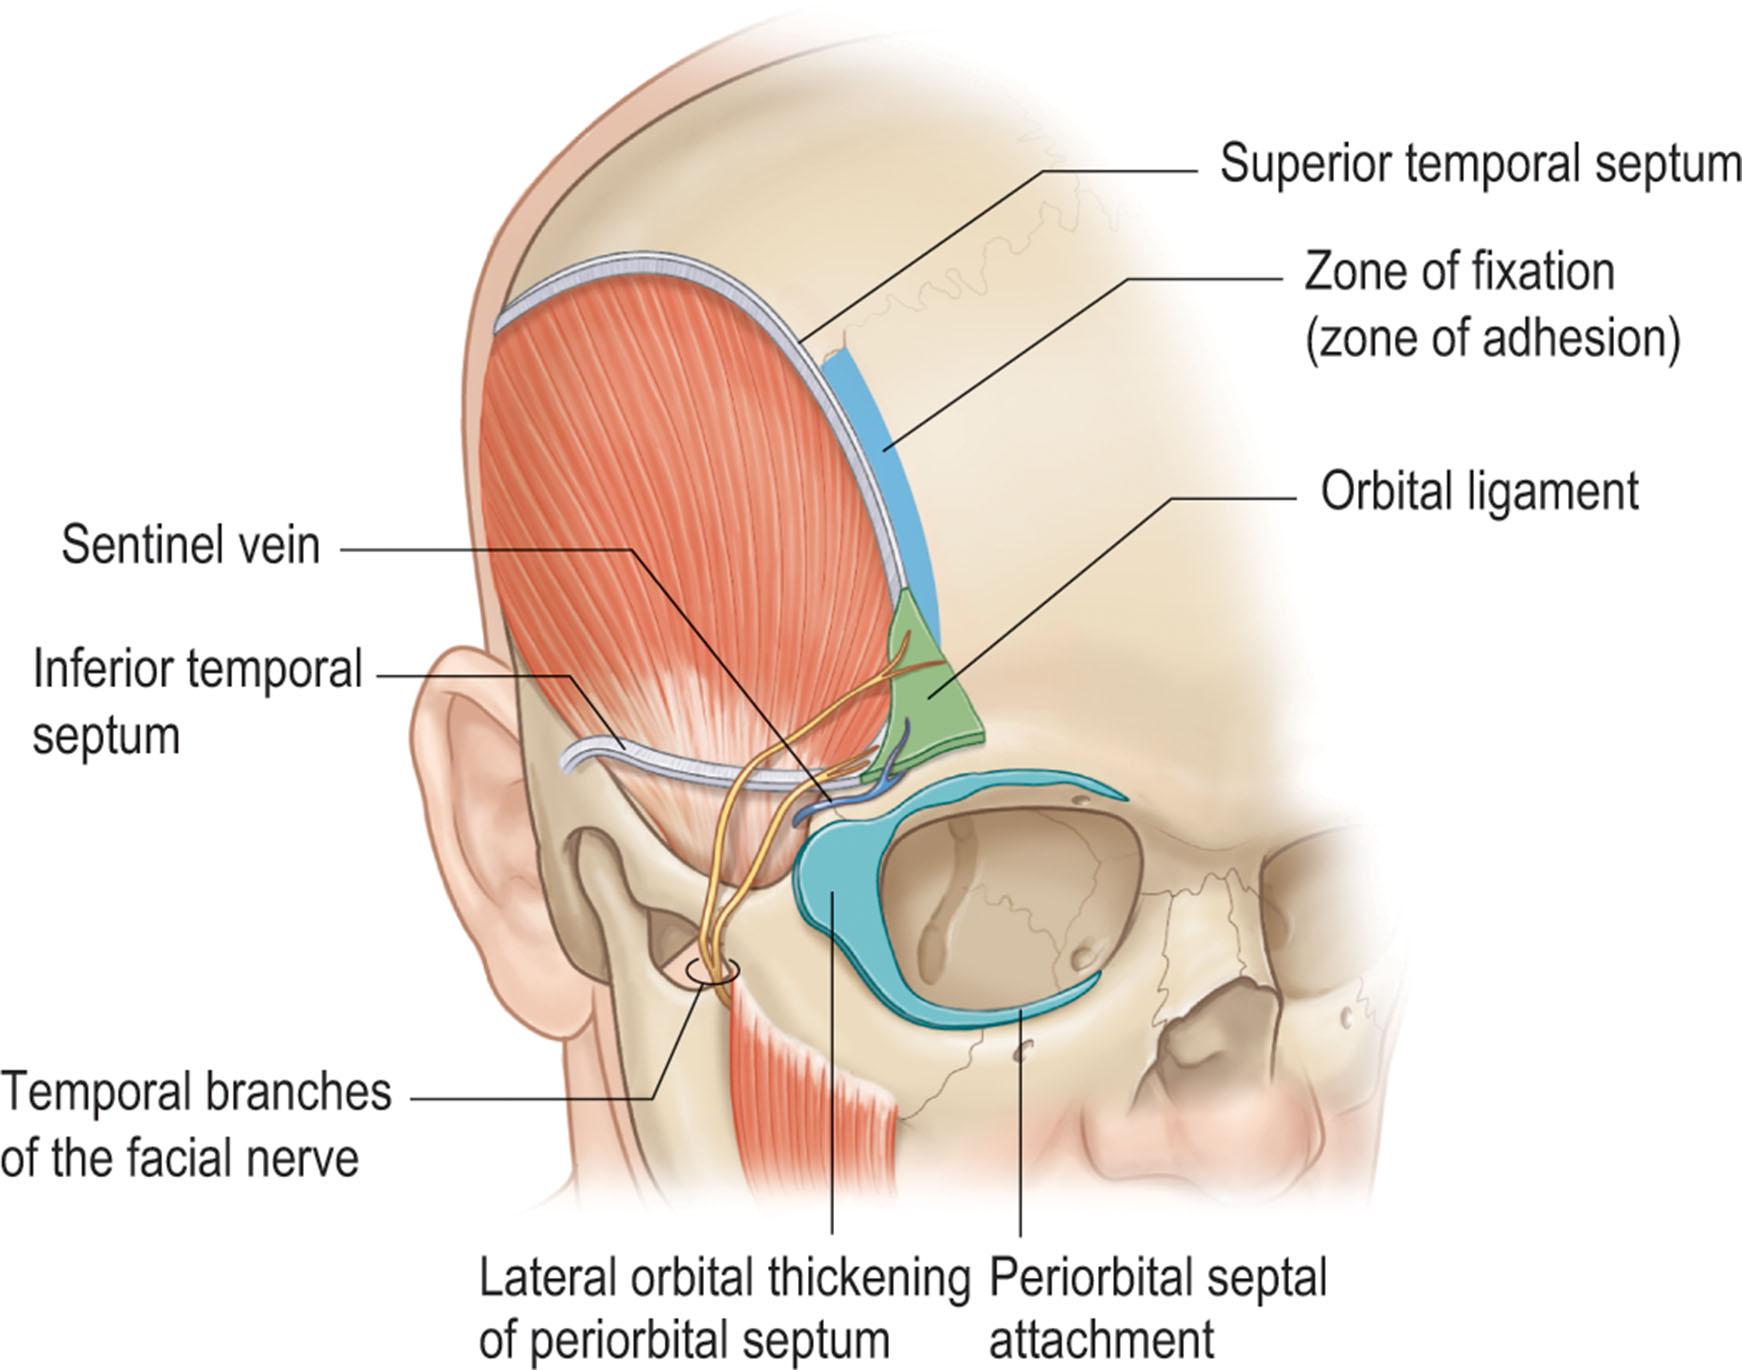 Figure 11.2, Fascial attachments around the orbital rim. The inferior end of the zone of fixation is the orbital ligament. The lateral orbital thickening is a lateral extension of the septum that extends across the lateral orbital rim onto deep temporal fascia.